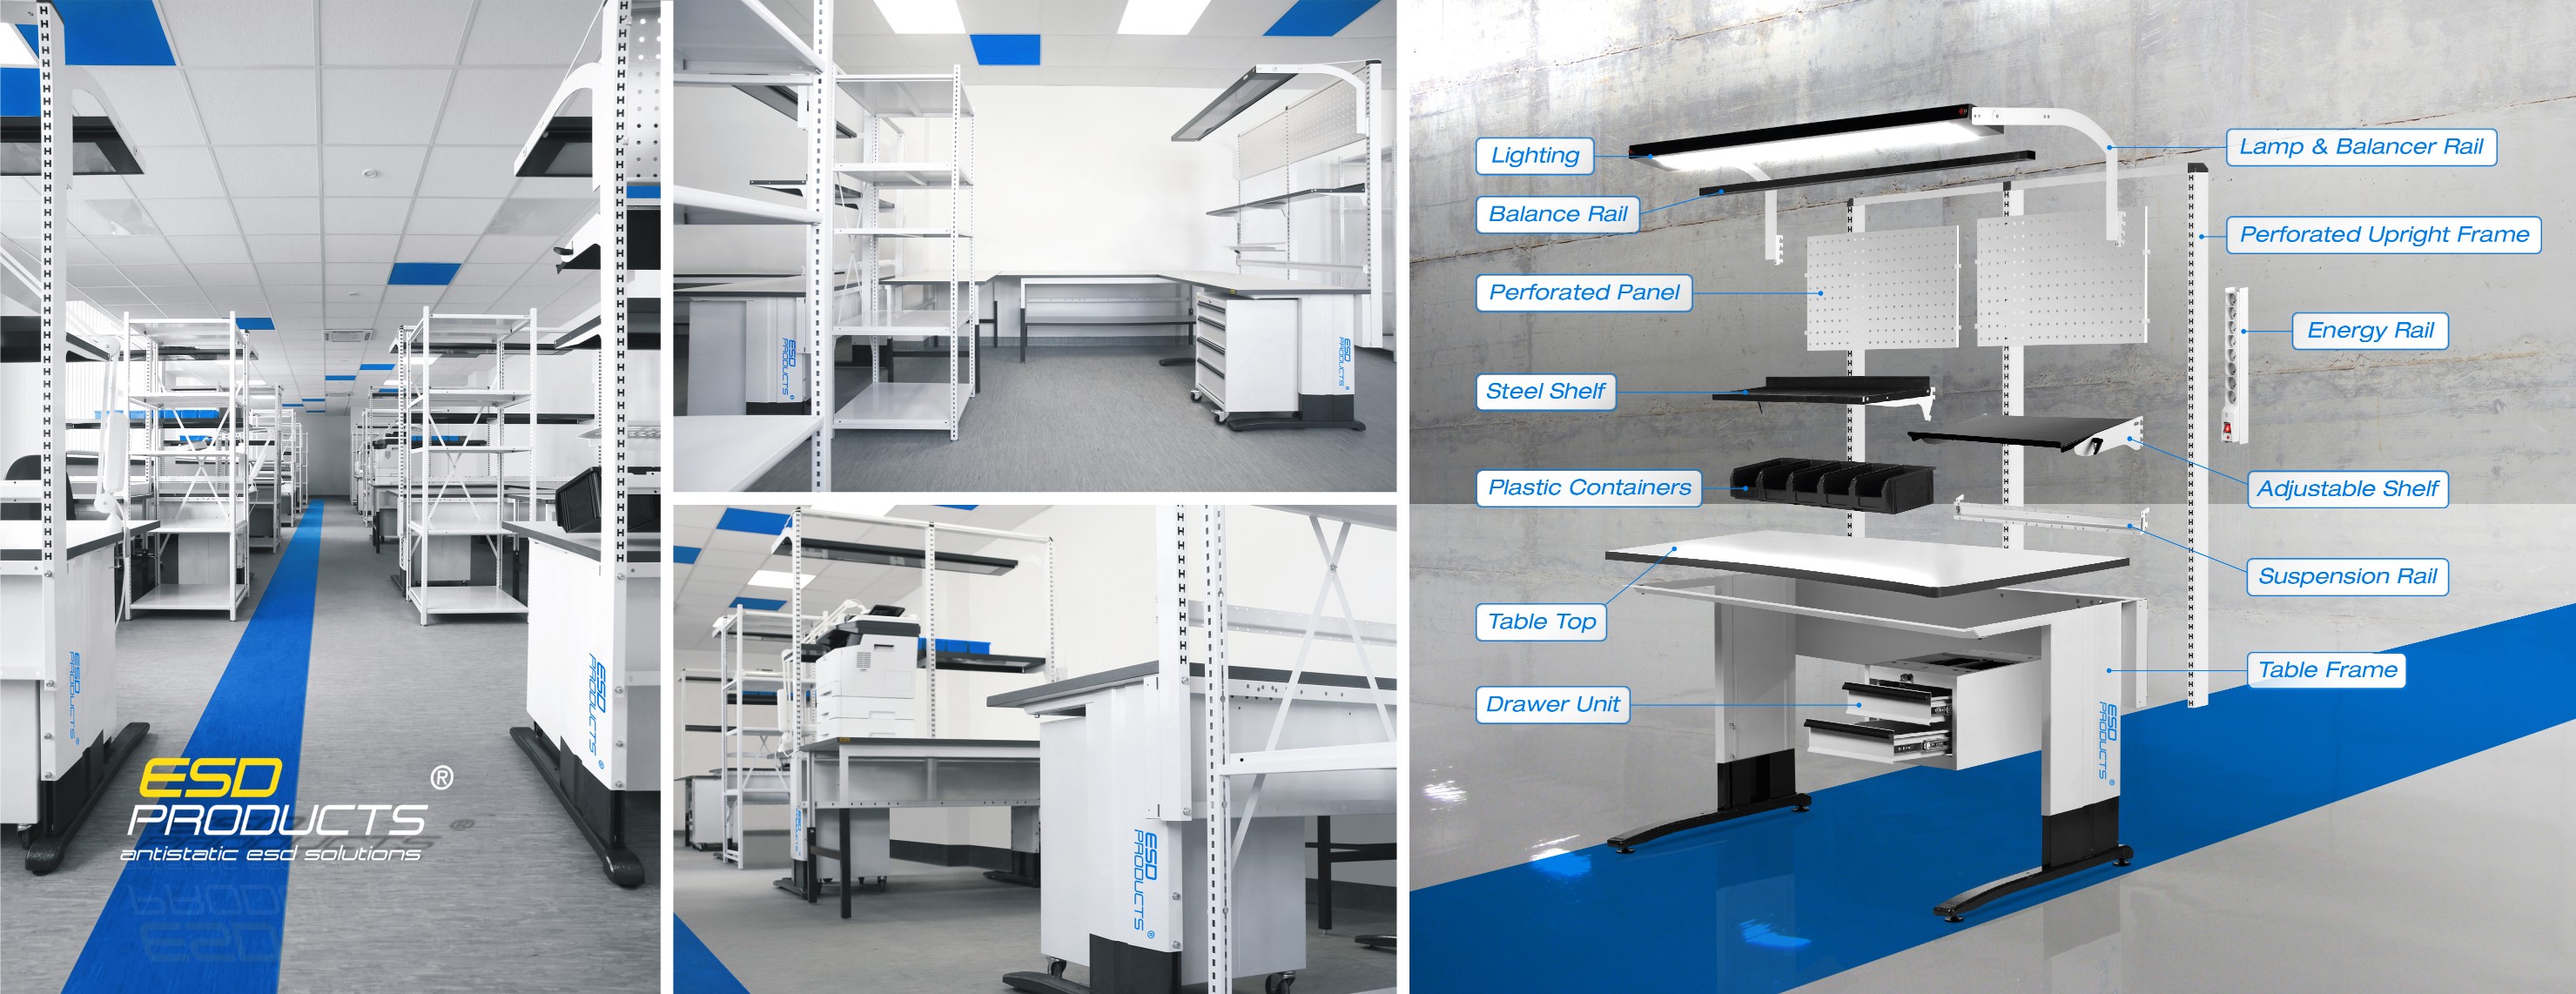 Antistatic-esd-electronics-work-stations-workbenches